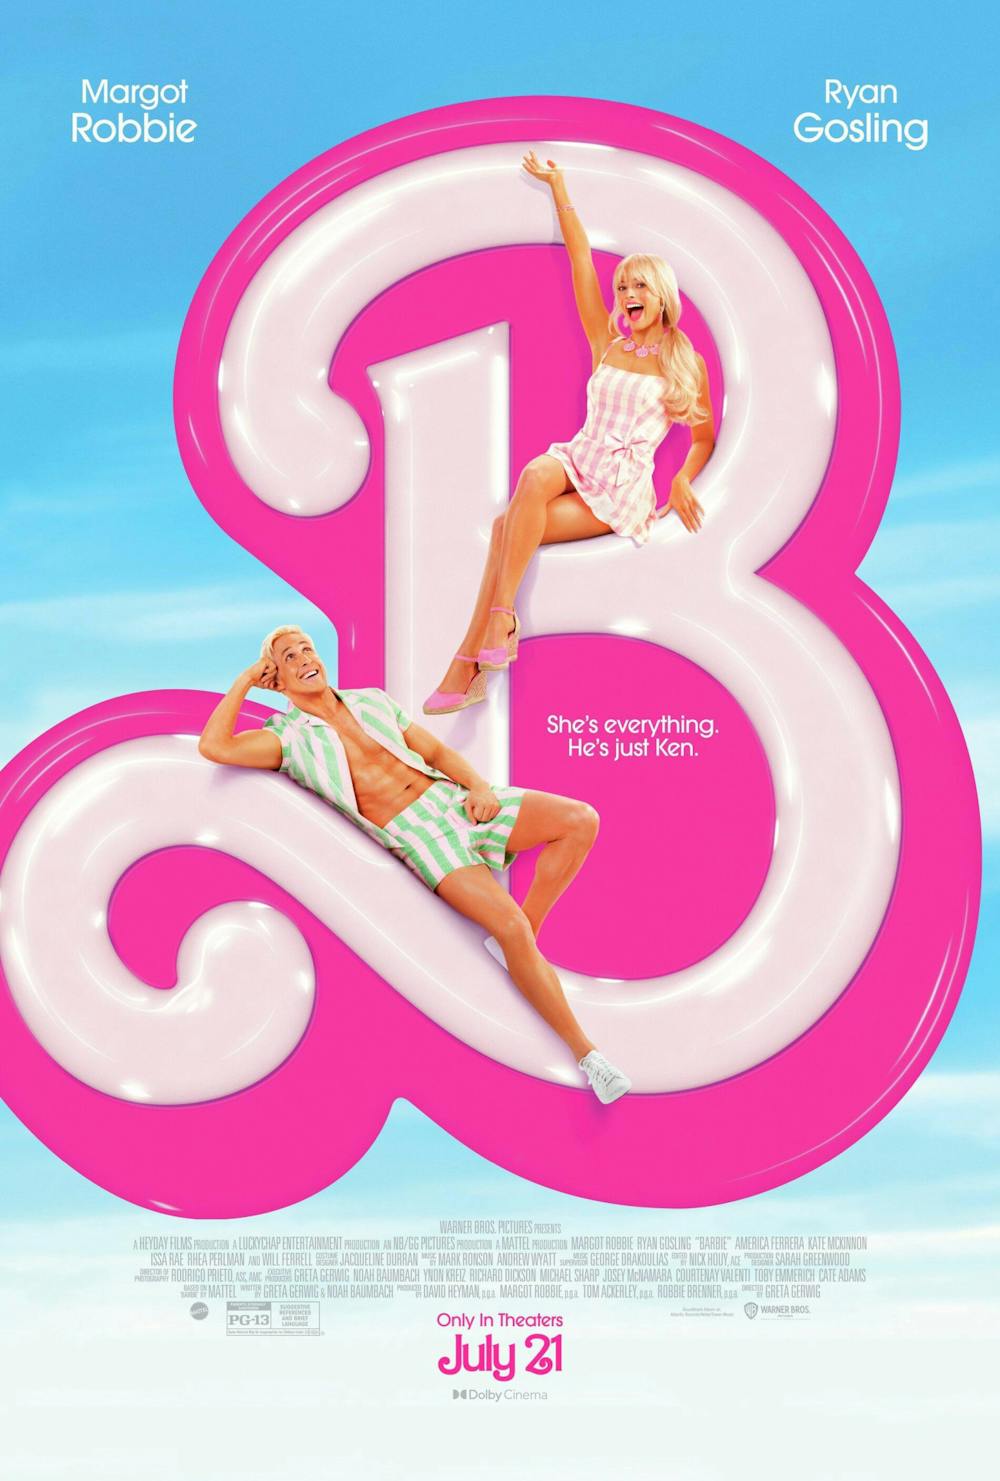 Review: Barbie brings herself into reality and us with her